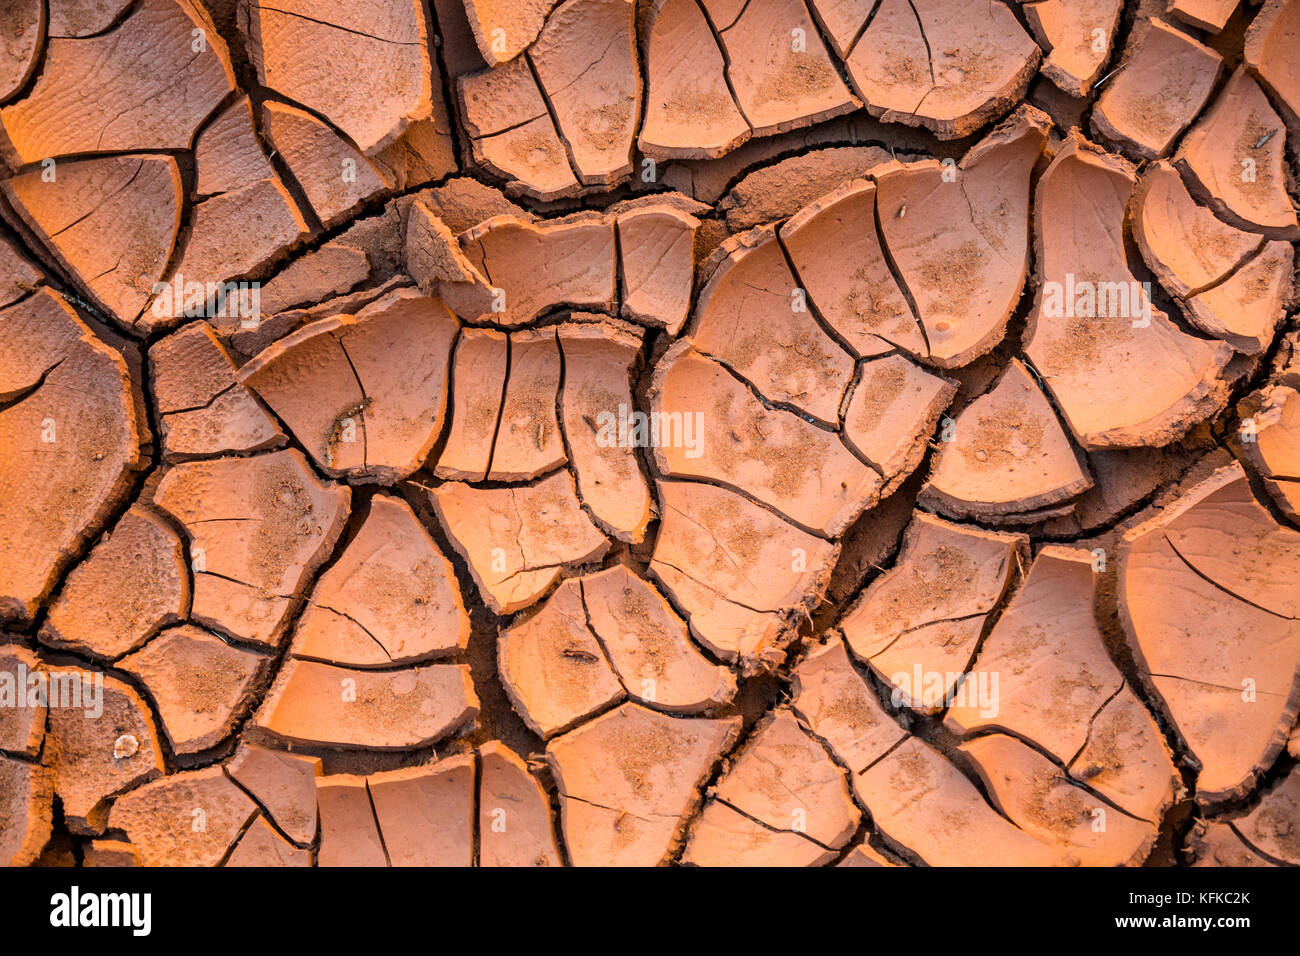 Red mud in a small canyon in the desert of Southern Utah. The mud was wet from a flash flood, now drying in the desert heat and cracking up in layers Stock Photo